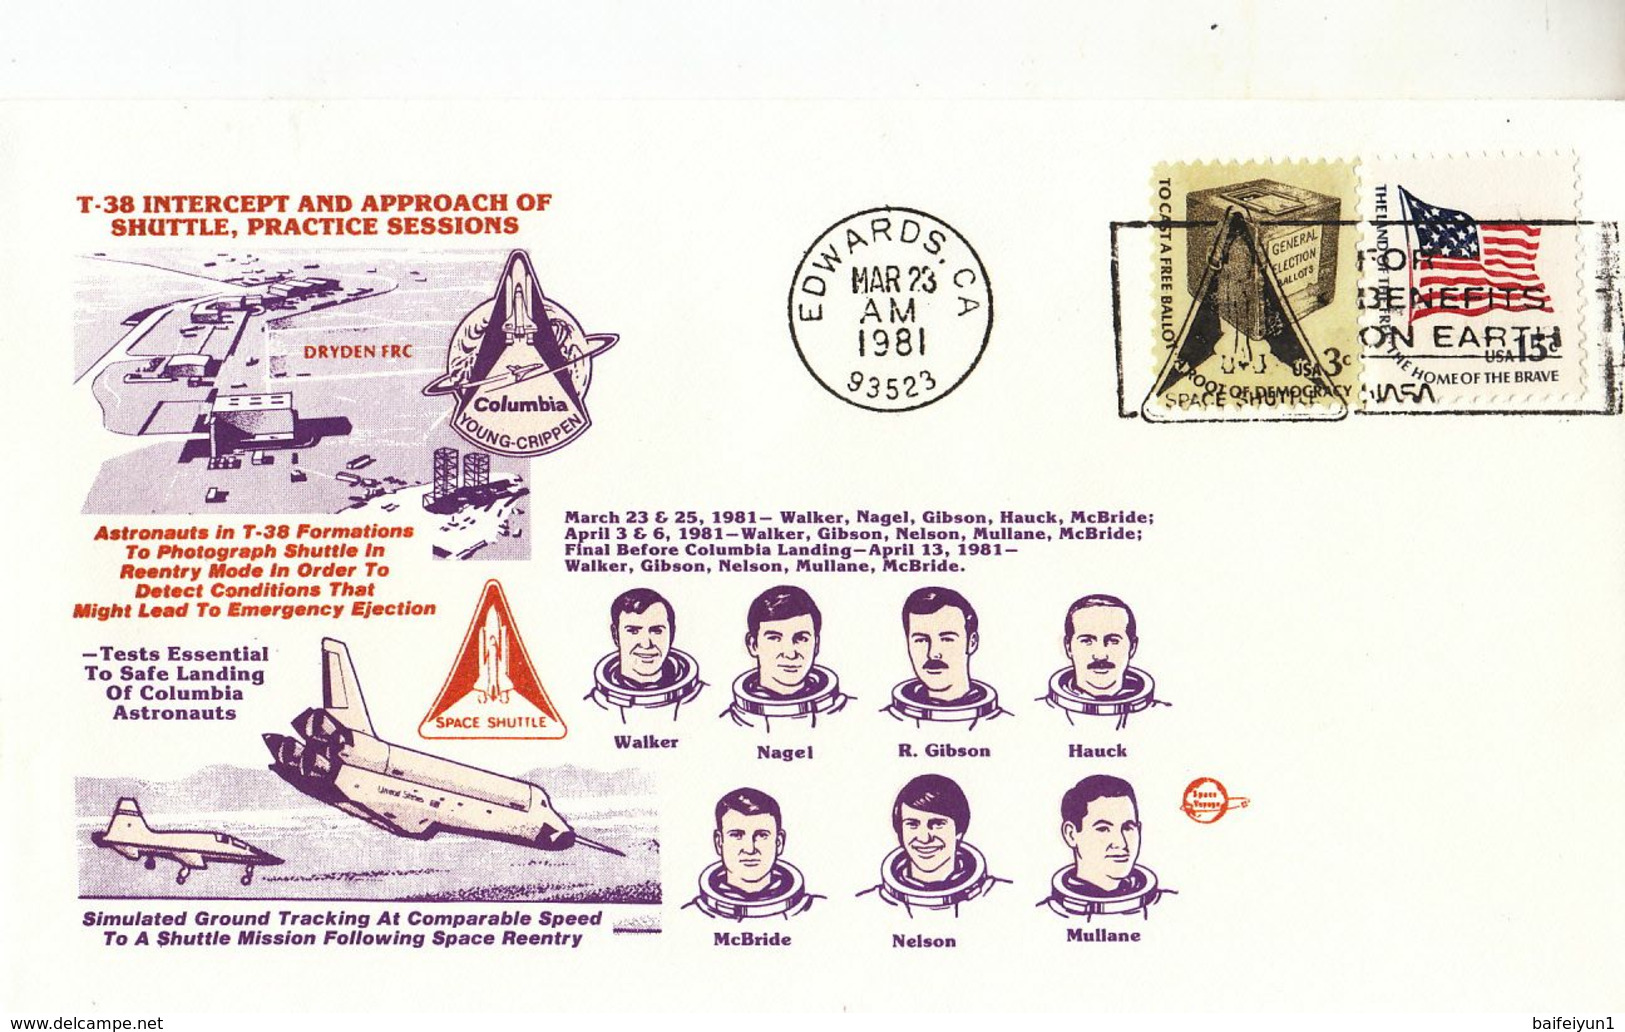 USA 1981  T-38 Intercept And Approach Of Shuttle Practice Sessions Commemorative Cover B - North  America